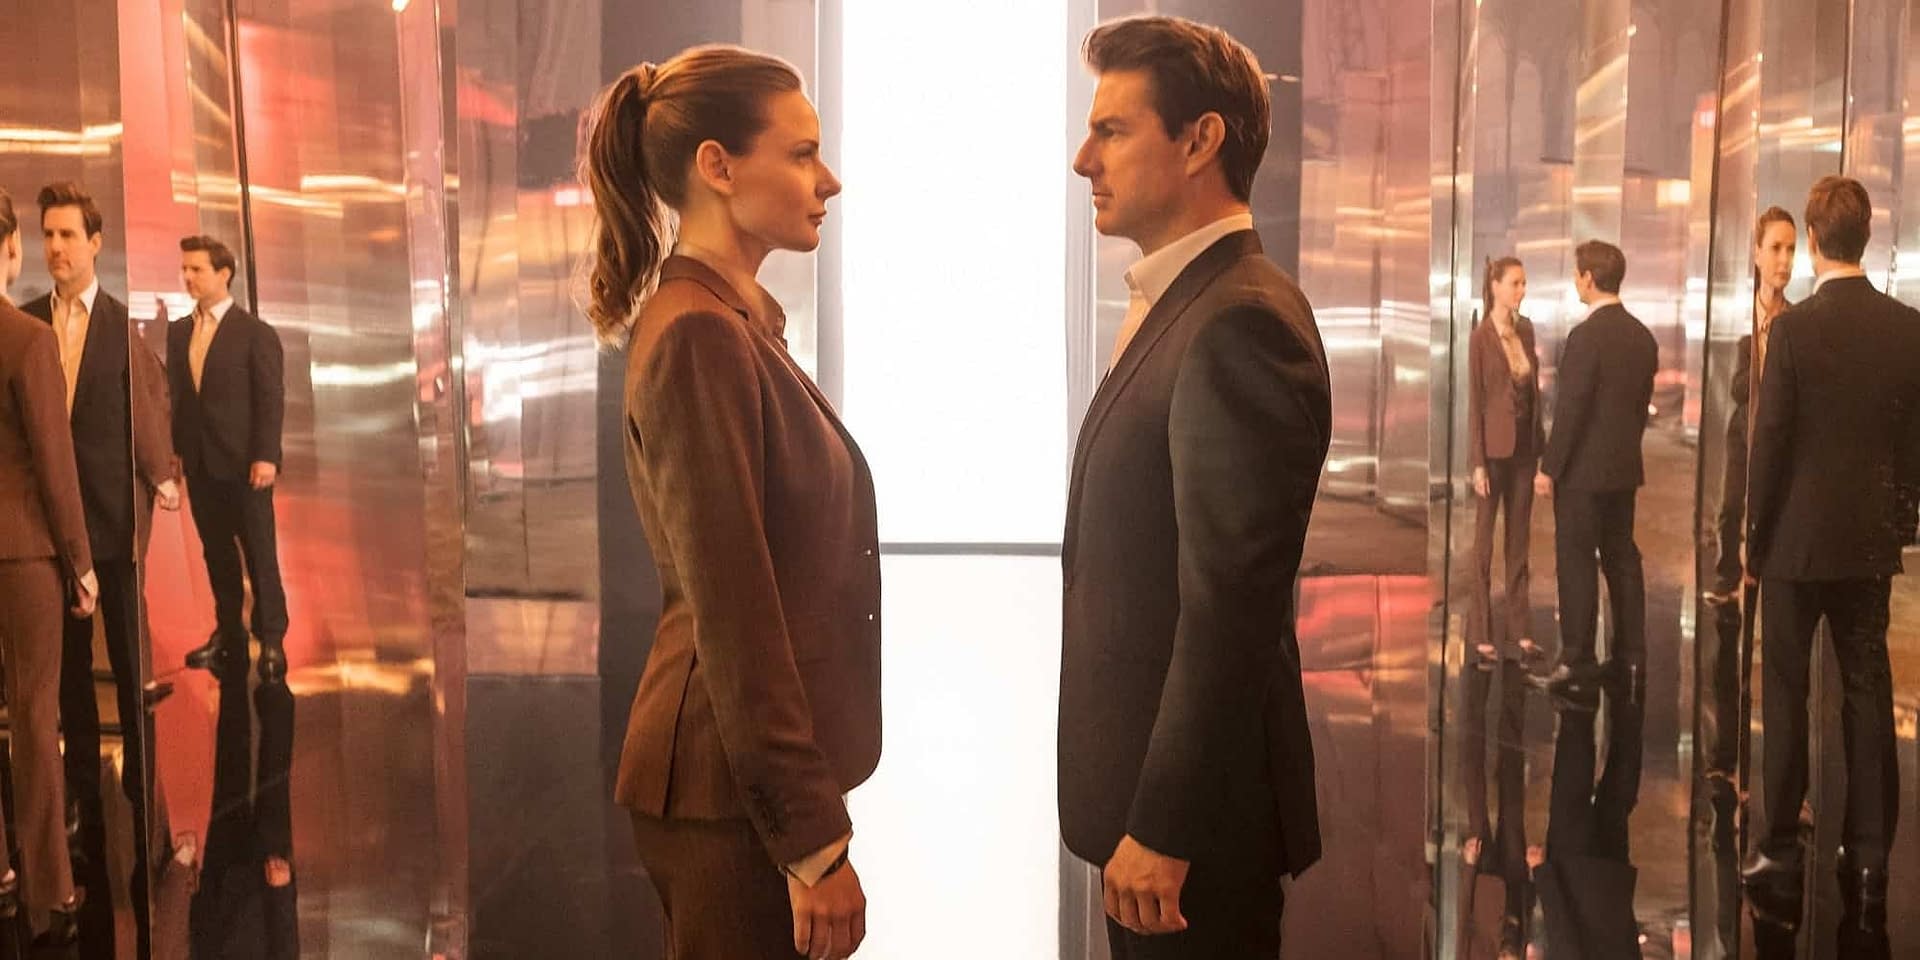 Rebecca-Ferguson-and-Tom-Cruise-in-Mission-Impossible-Fallout-cropped.jpg